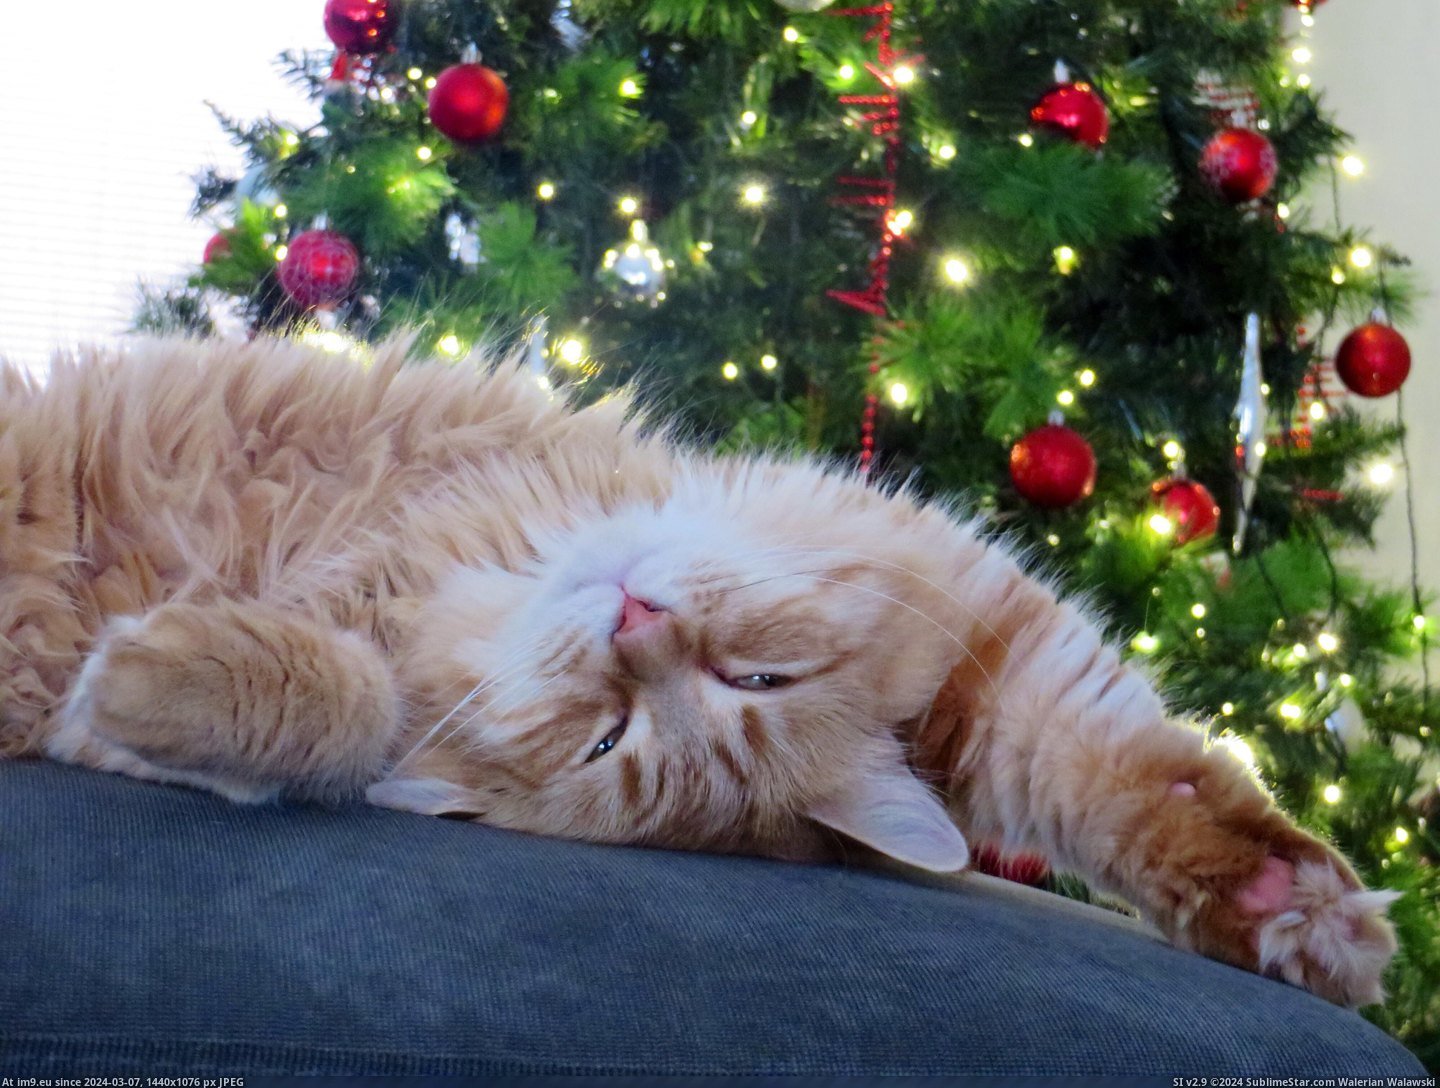 #Cats #One #Pose #Christmas #Tree [Cats] Ok then, one more pose before we take down the Christmas tree. Pic. (Bild von album My r/CATS favs))